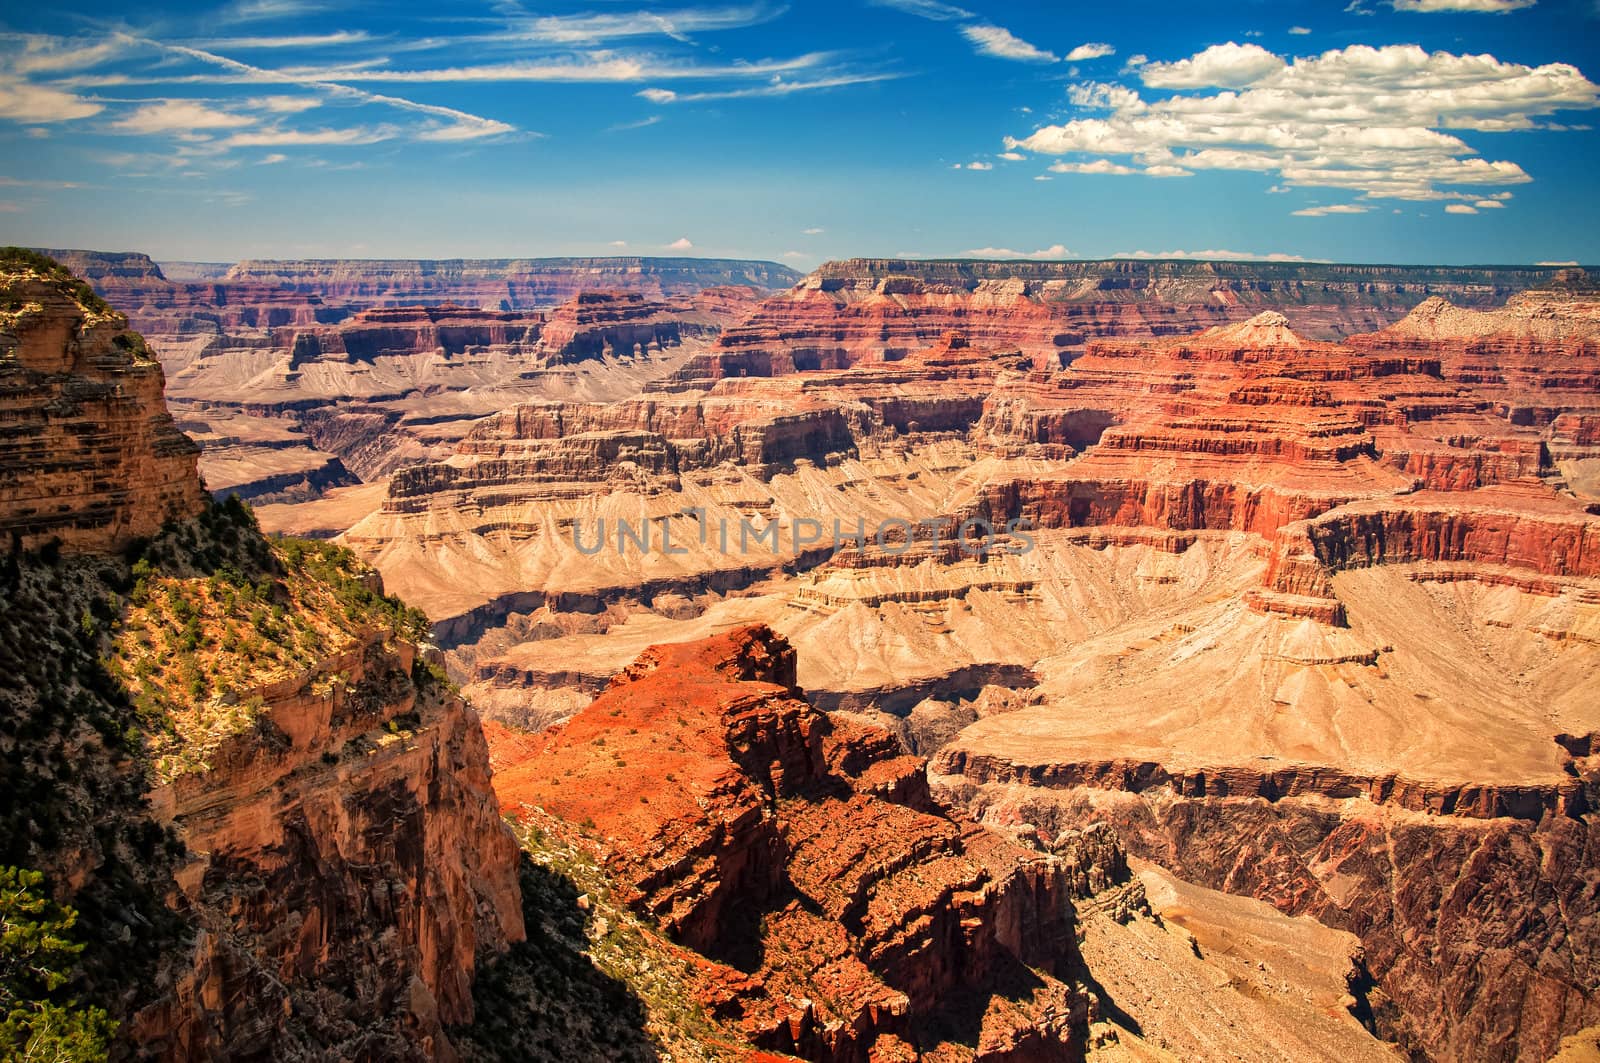 Grand canyon clear day landscape view with clouds, Arizona, USA